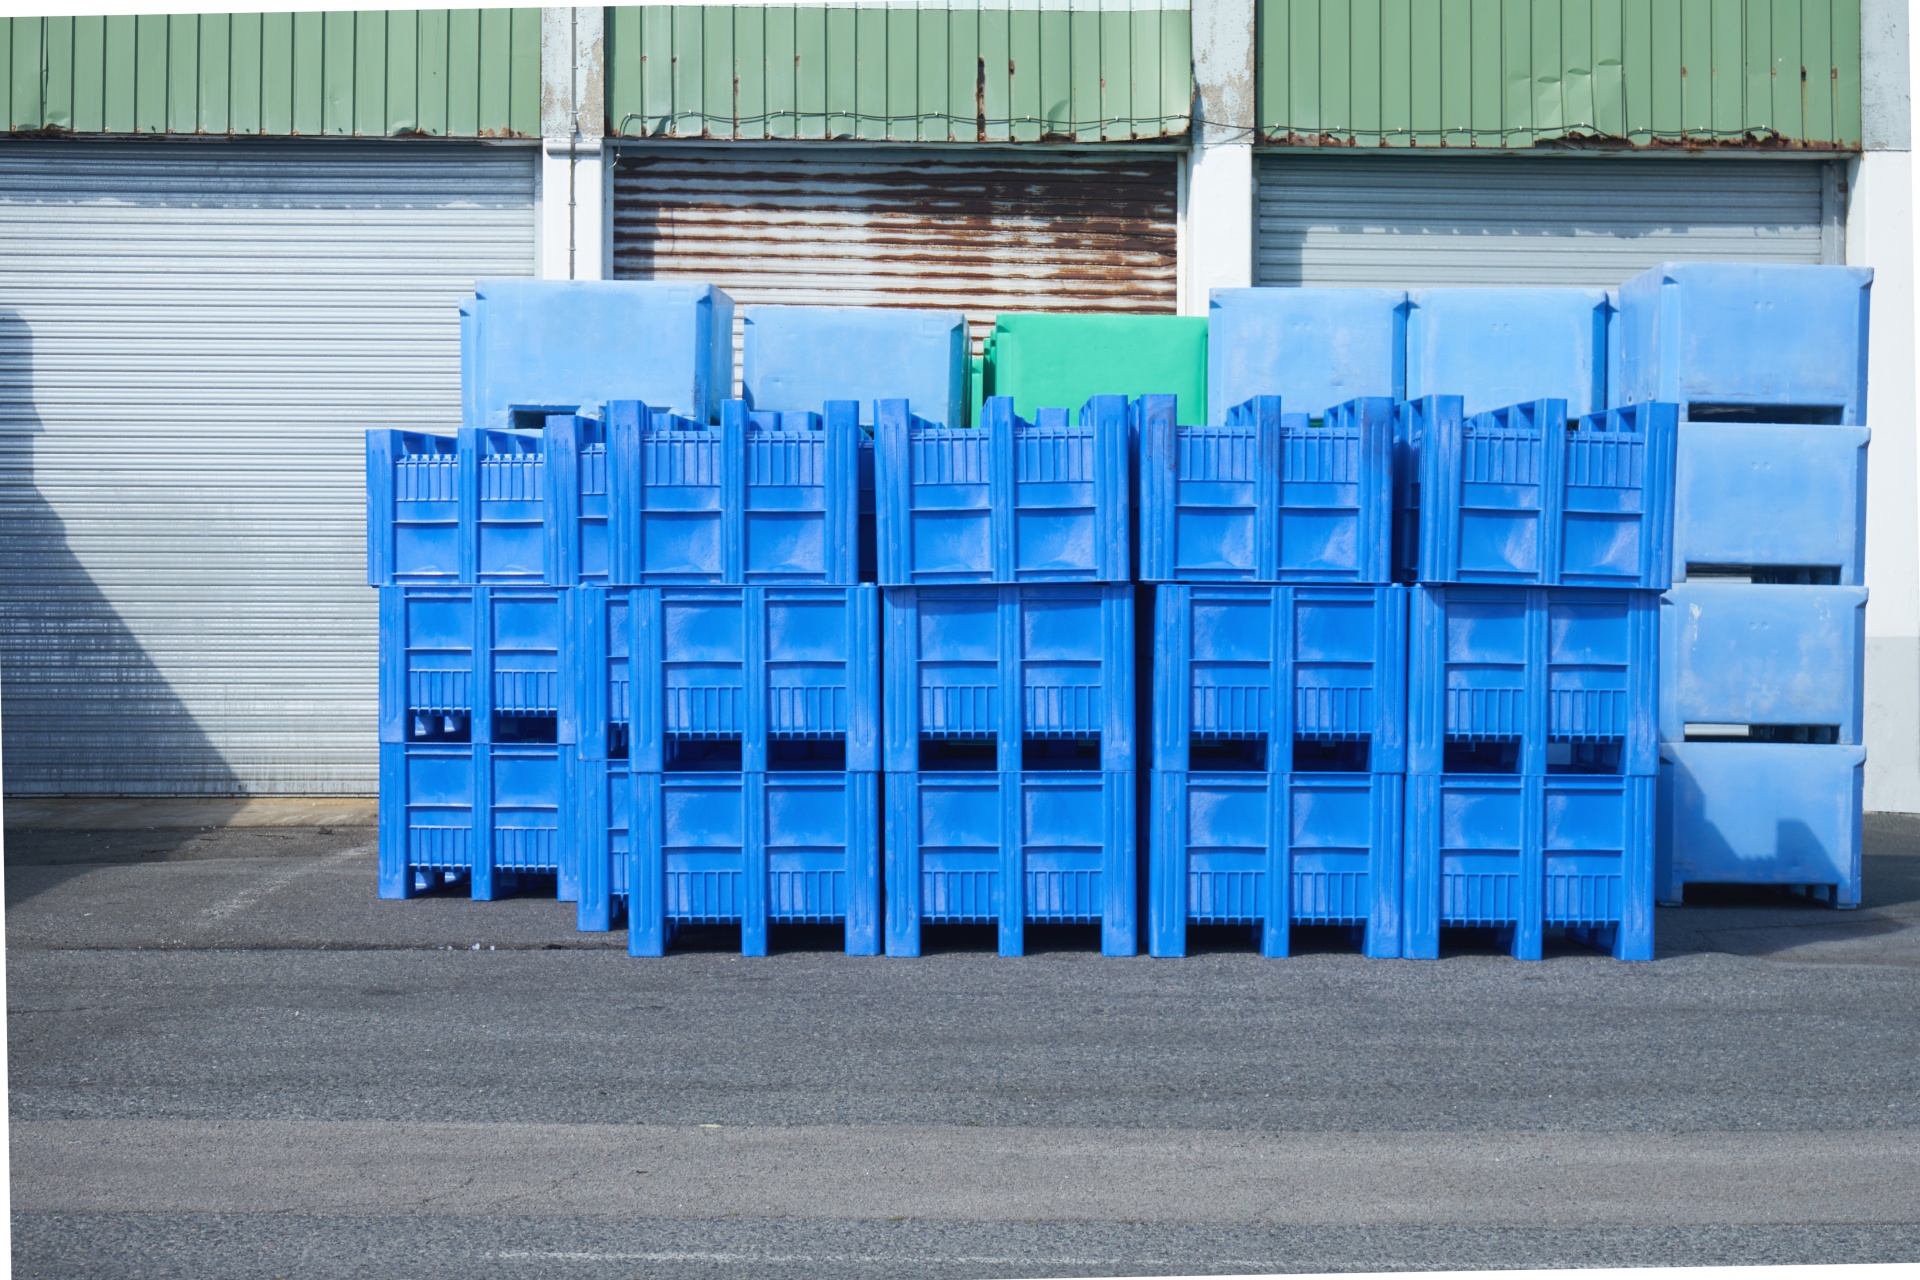 Crates Stacked On The Quay